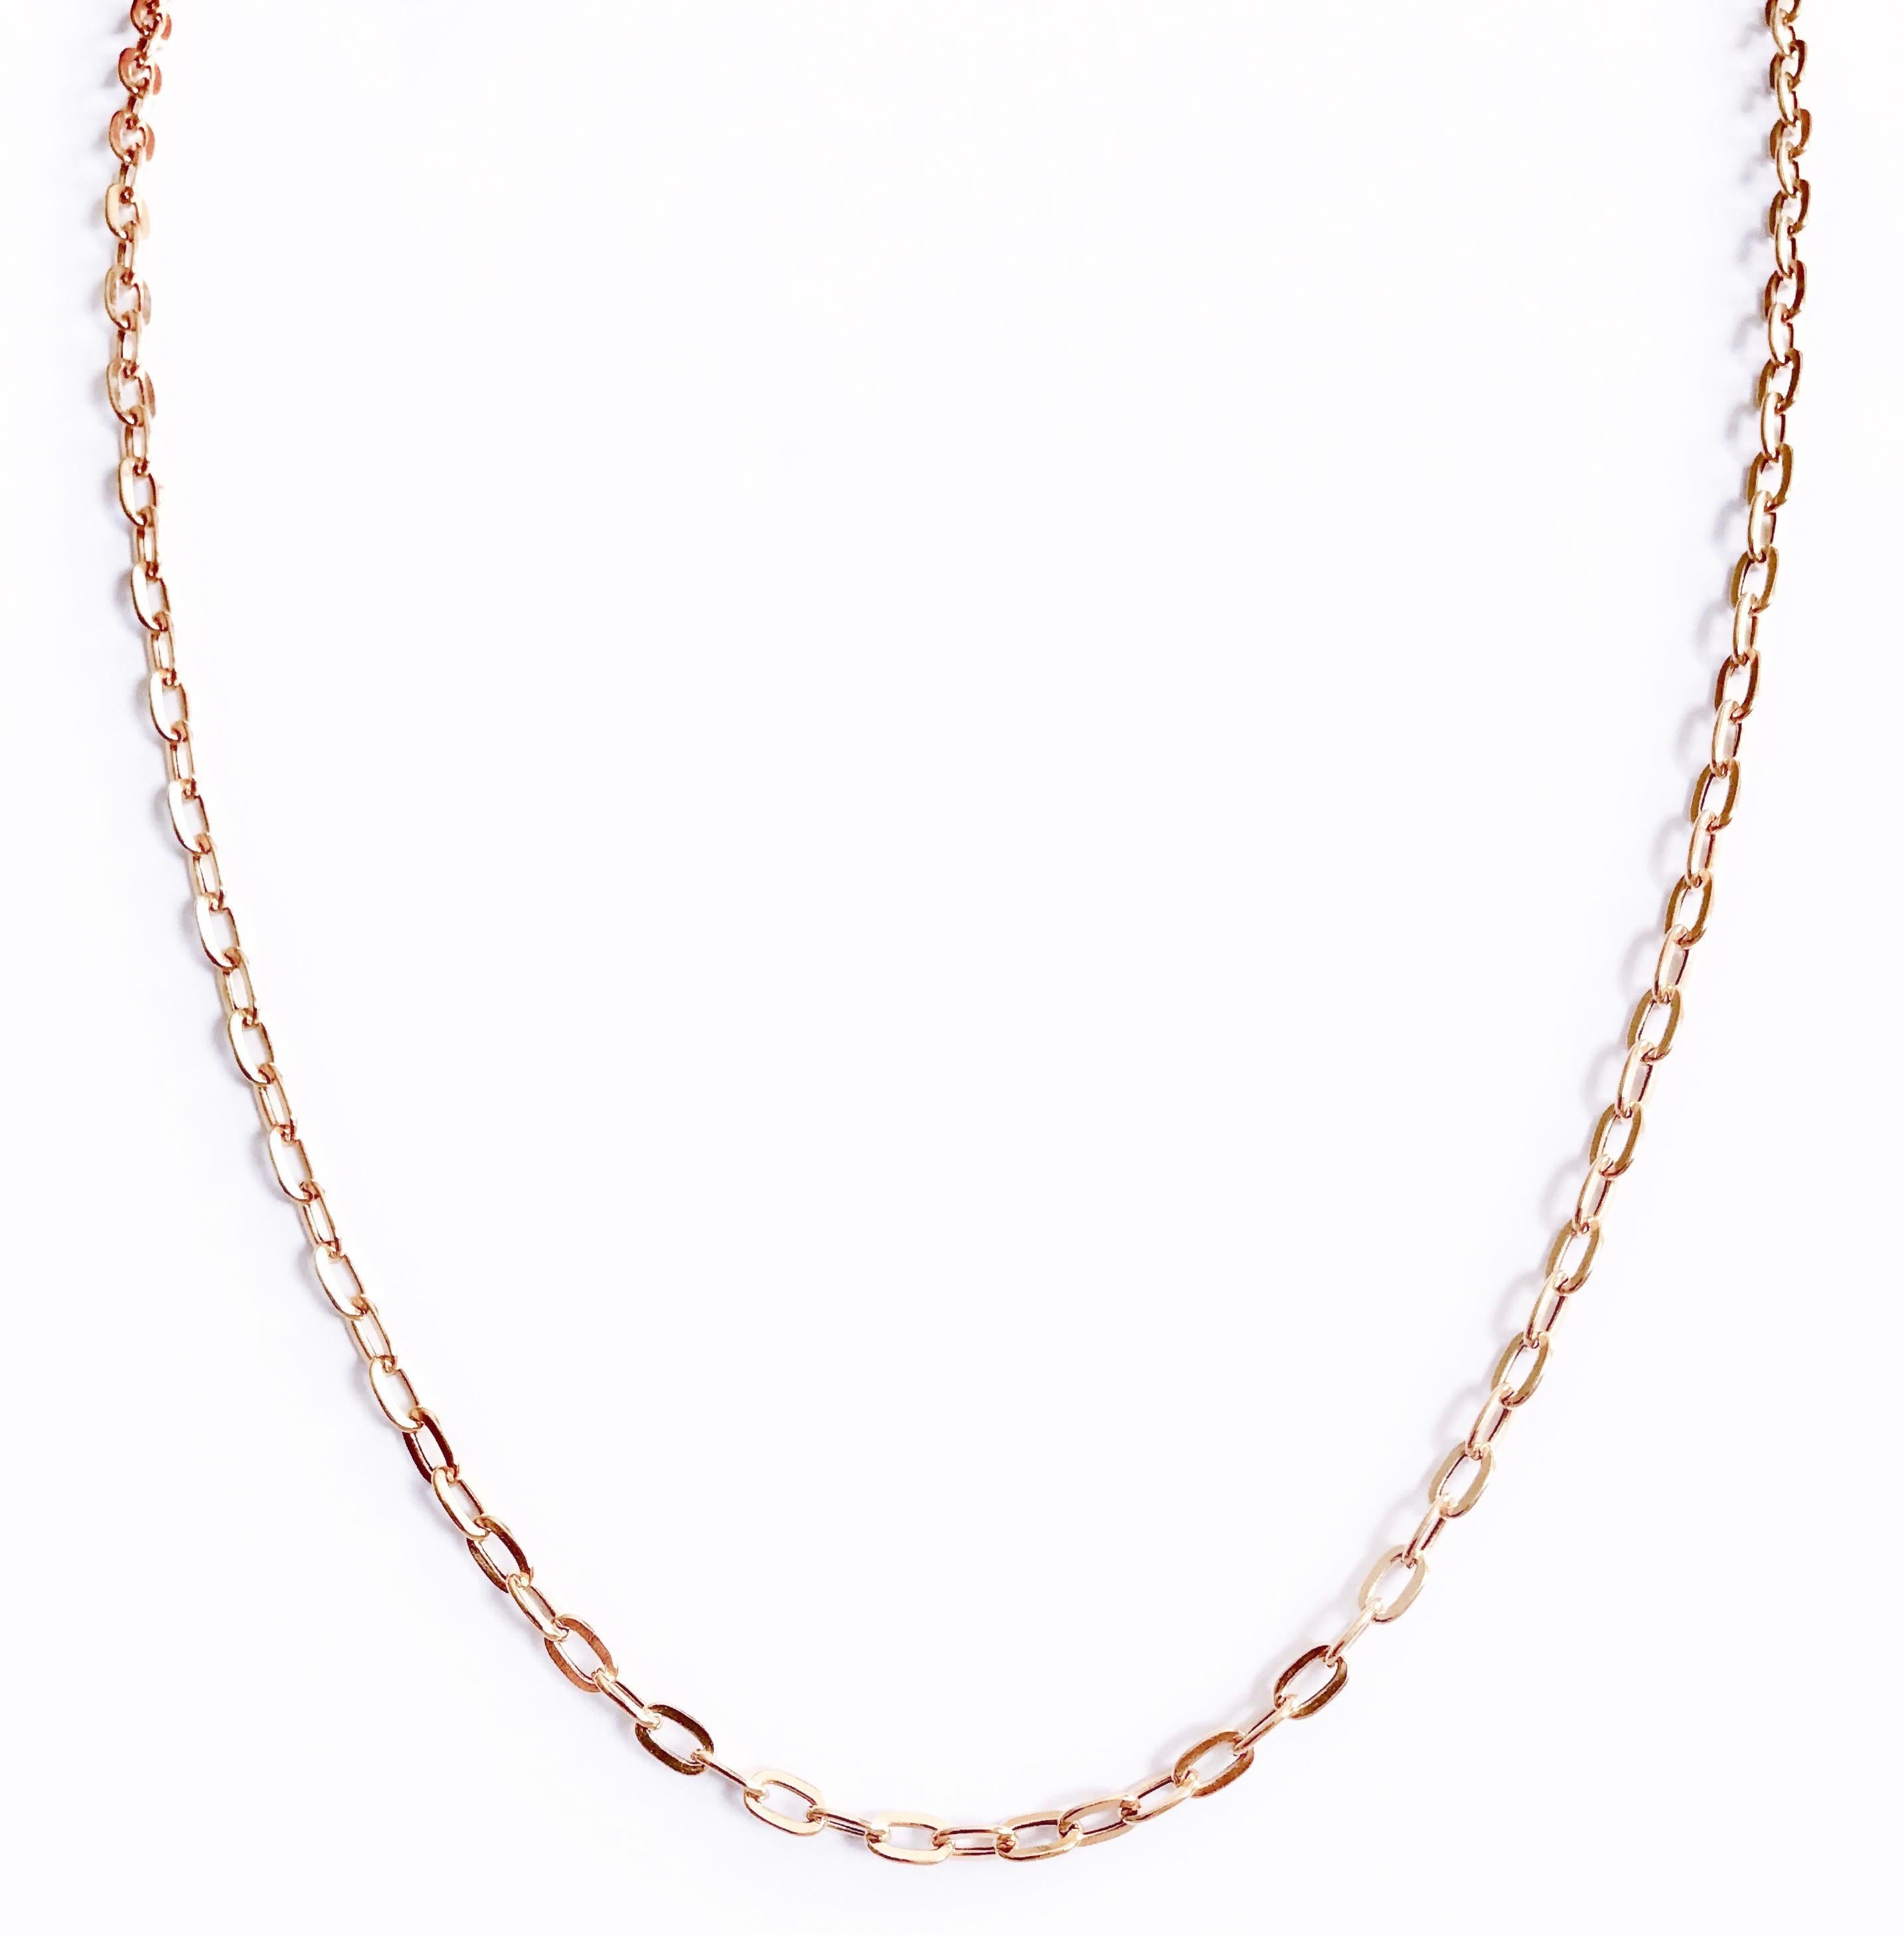 18Karat yellow gold chain.
Ideal to wear with  pendants, layered with other chains or just on its own.
Gauge:  2.5 mm
Length : 46.00 cm 
Hallmark: London’s  Goldsmiths’ Company –  Assay Office 

You will receive your jewellery in a pouch and a box